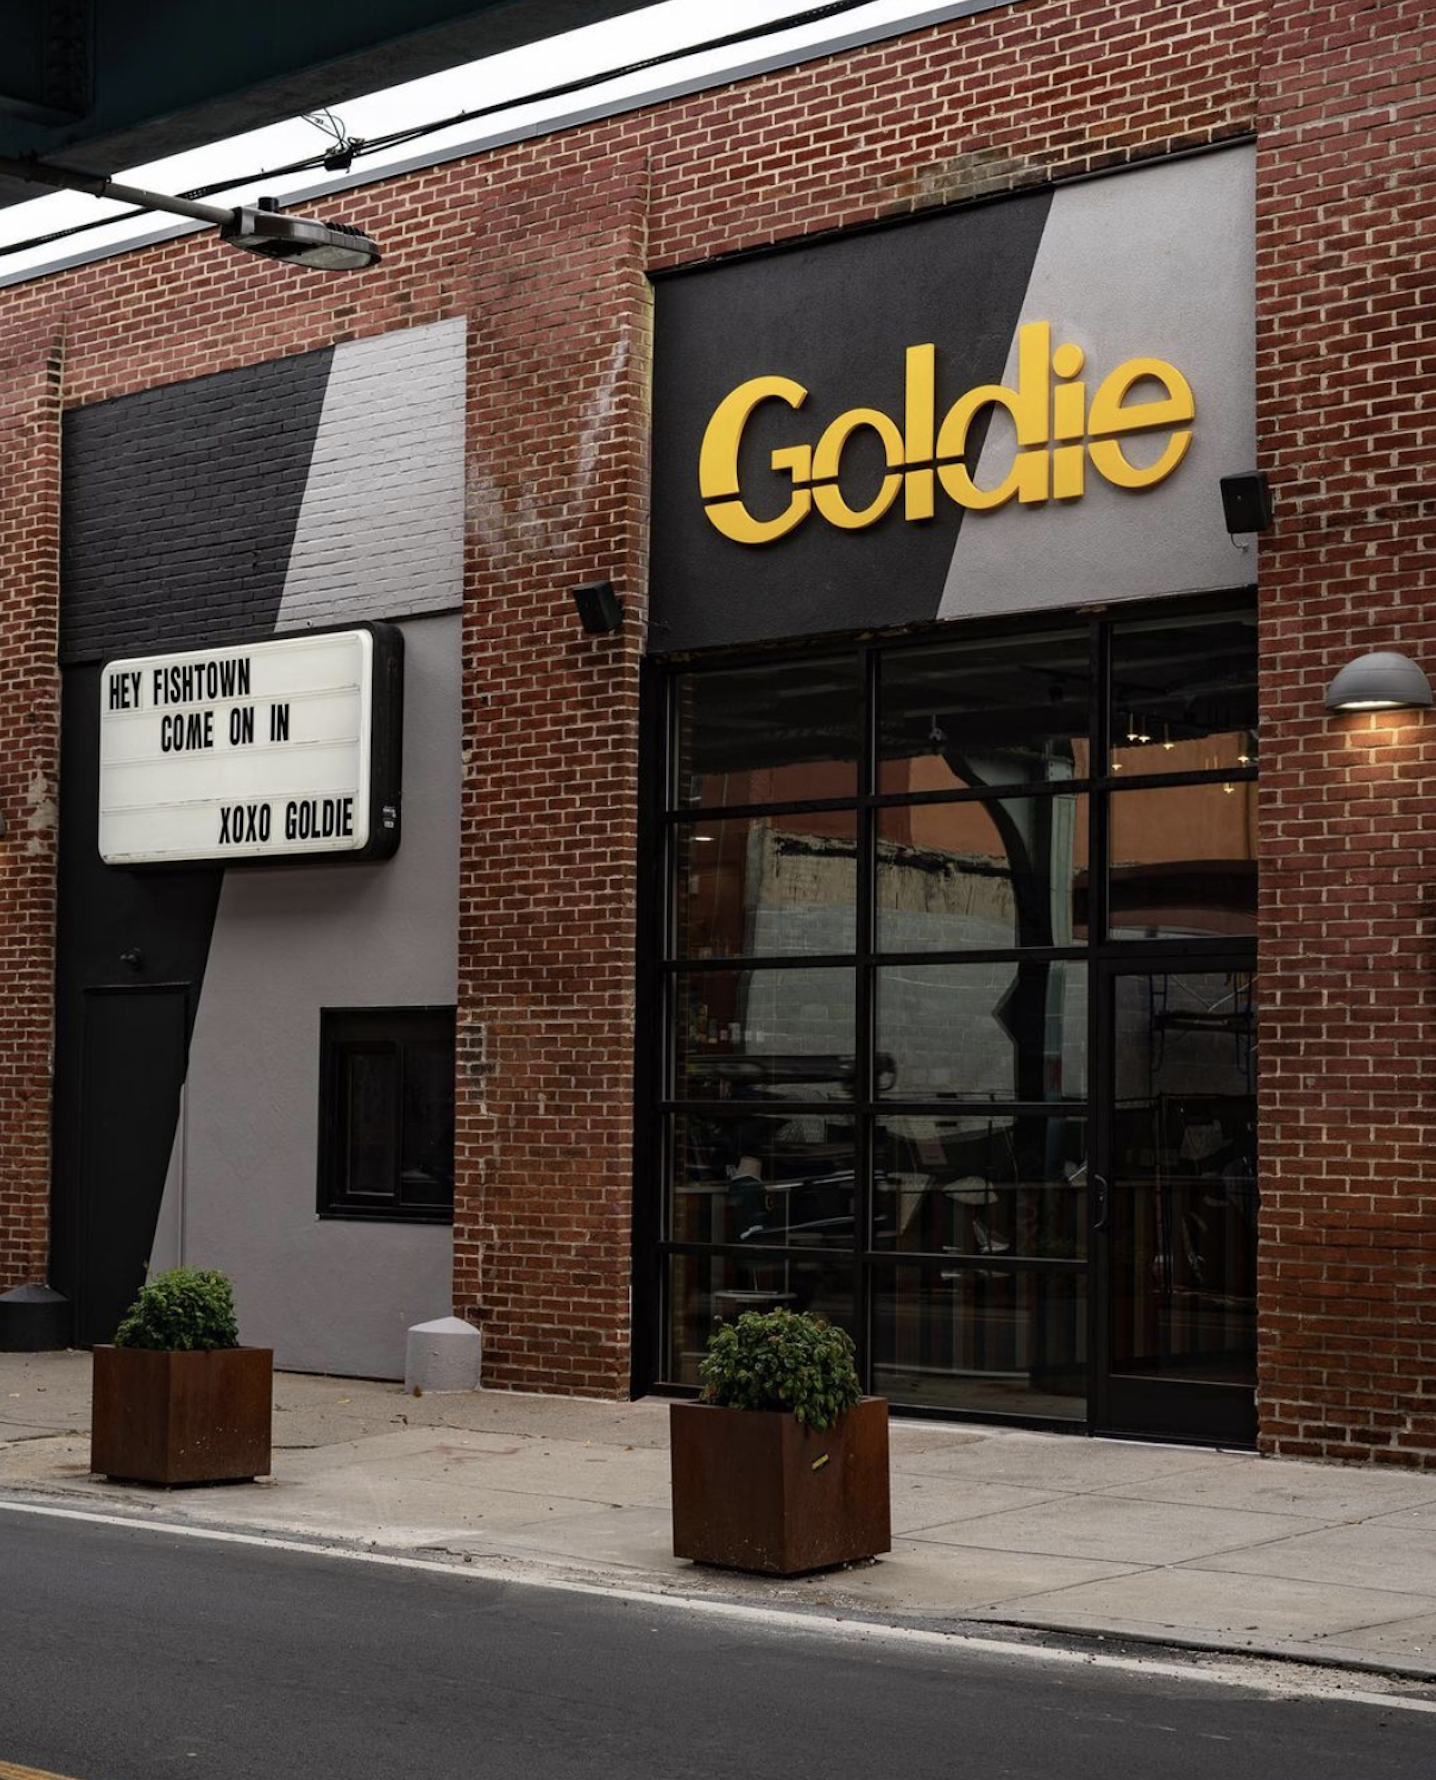 A storefront with a yellow sign reading “Goldie”